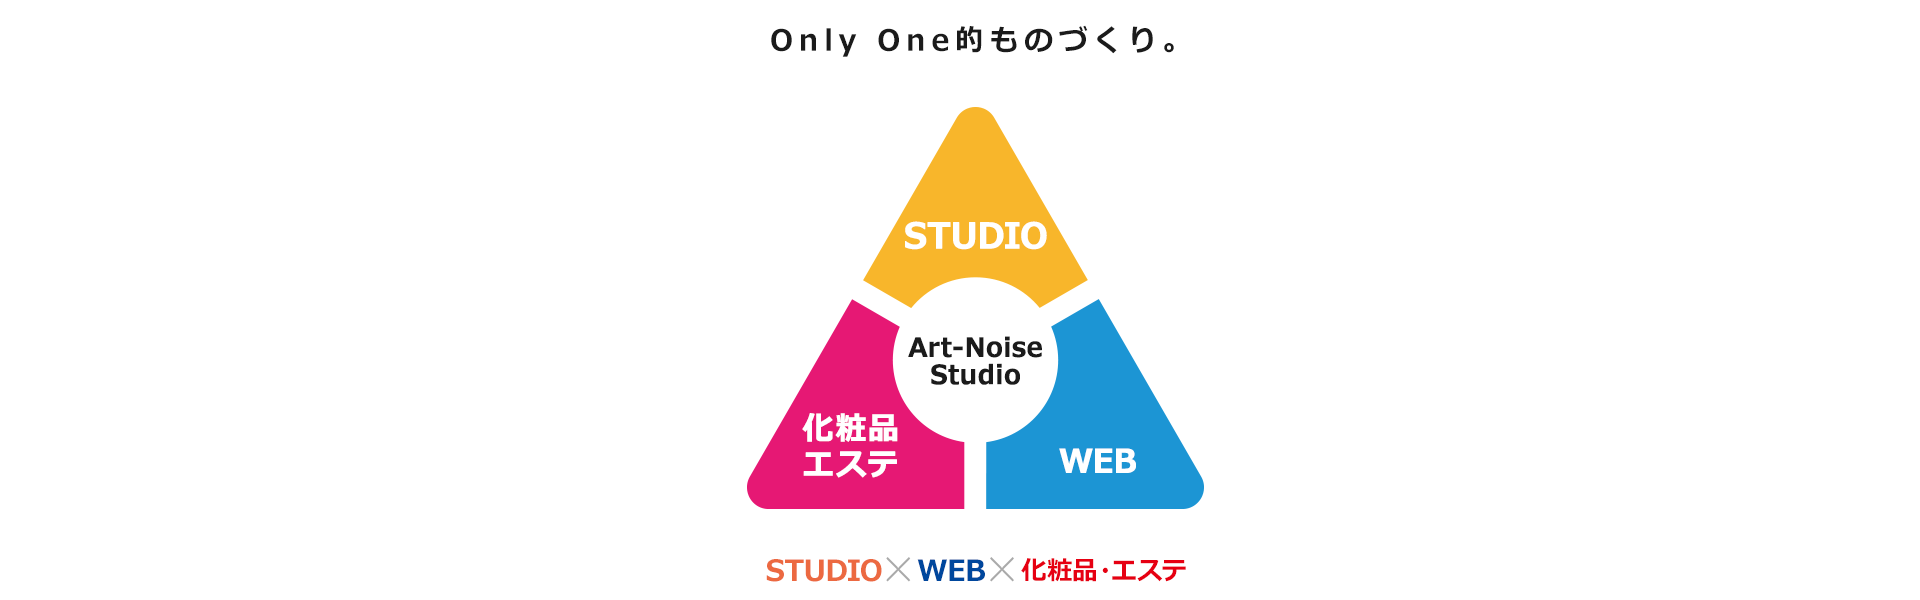 Only Oneなものづくり。